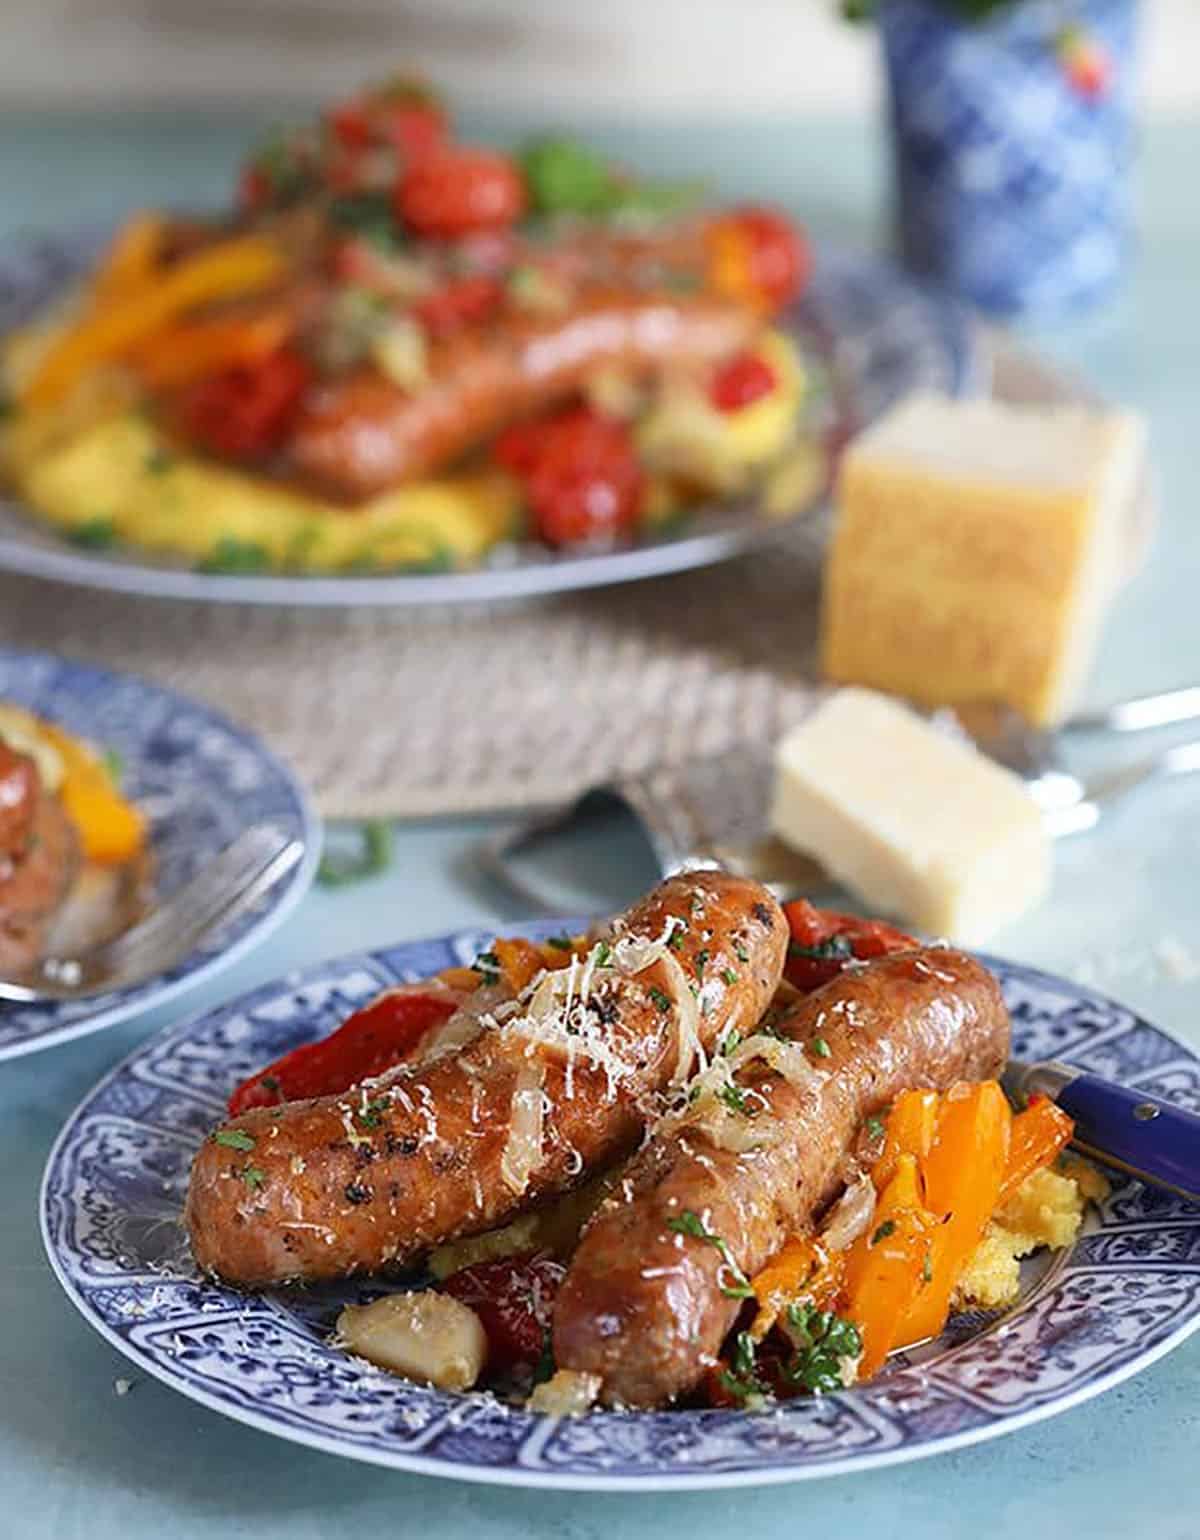 Italian sausage and peppers on parmesan polenta on a blue and white plate.